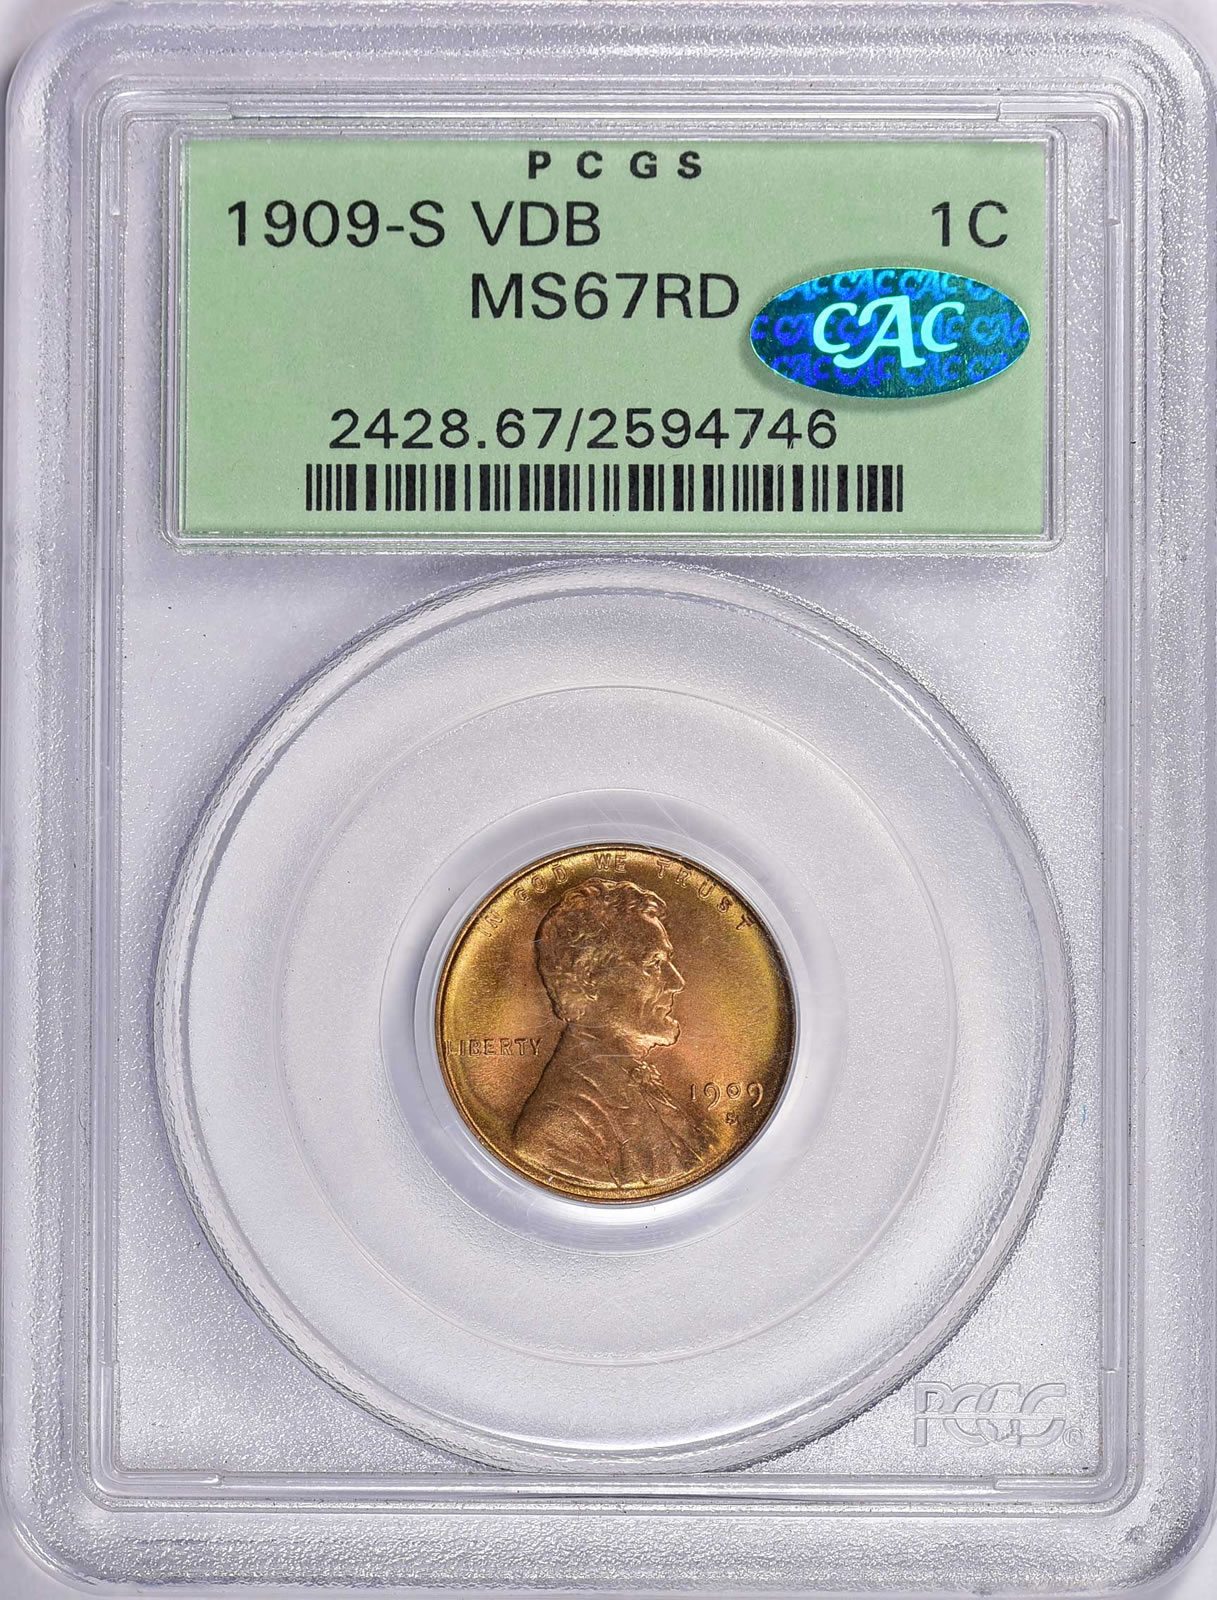 1909-S VDB Lincoln Cent PCGS XF40 CAC